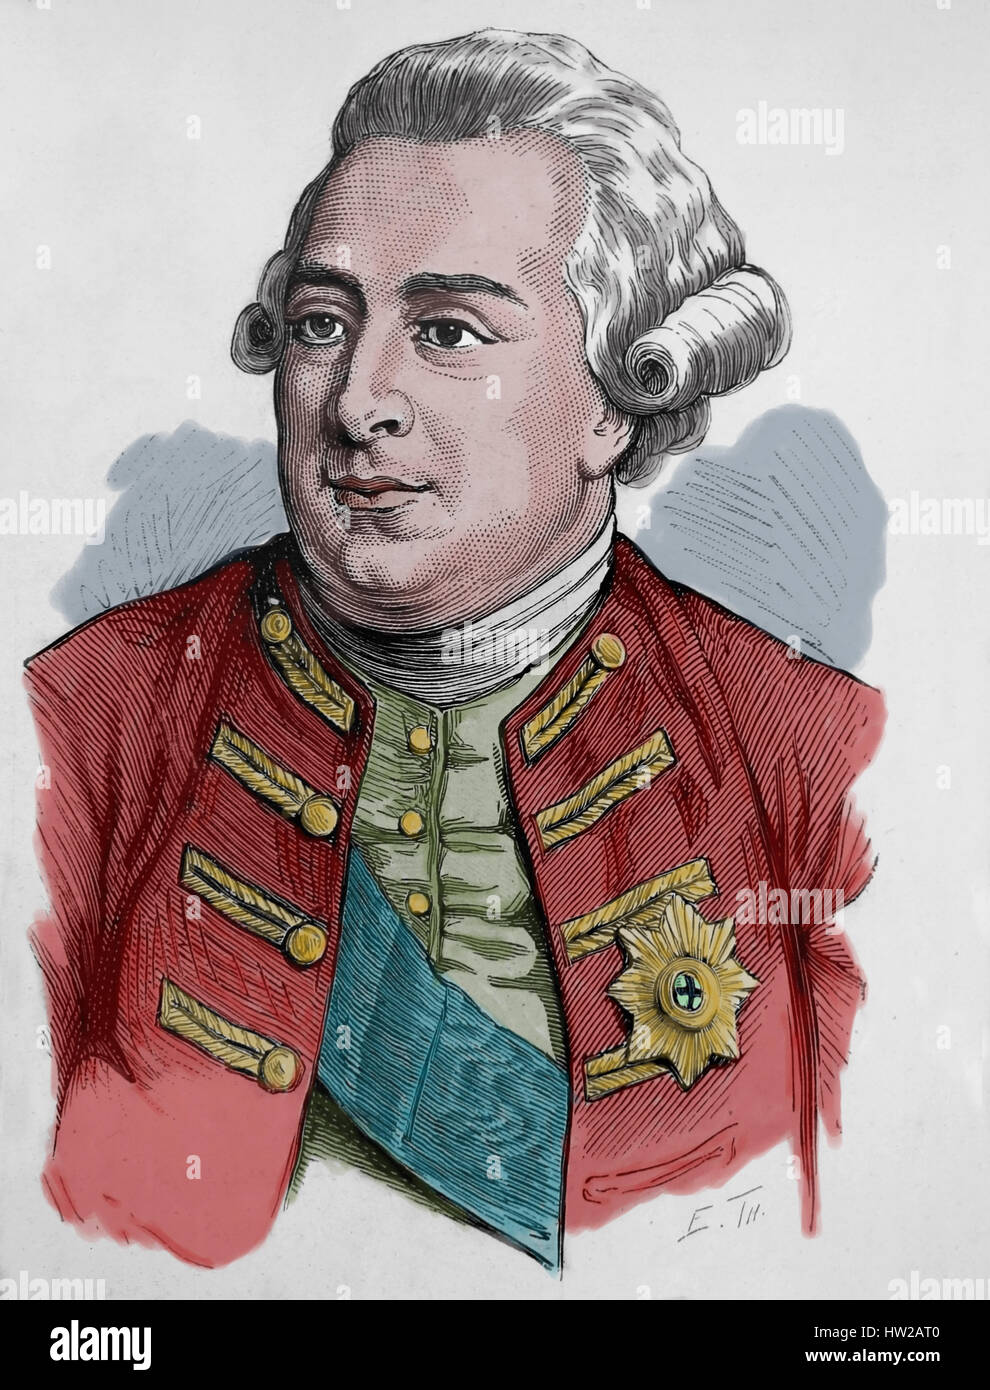 George III (1738-1820). King of Great Britain, Ireland later King of the UK and of Hanover. Engraving, 1883. Color. Stock Photo